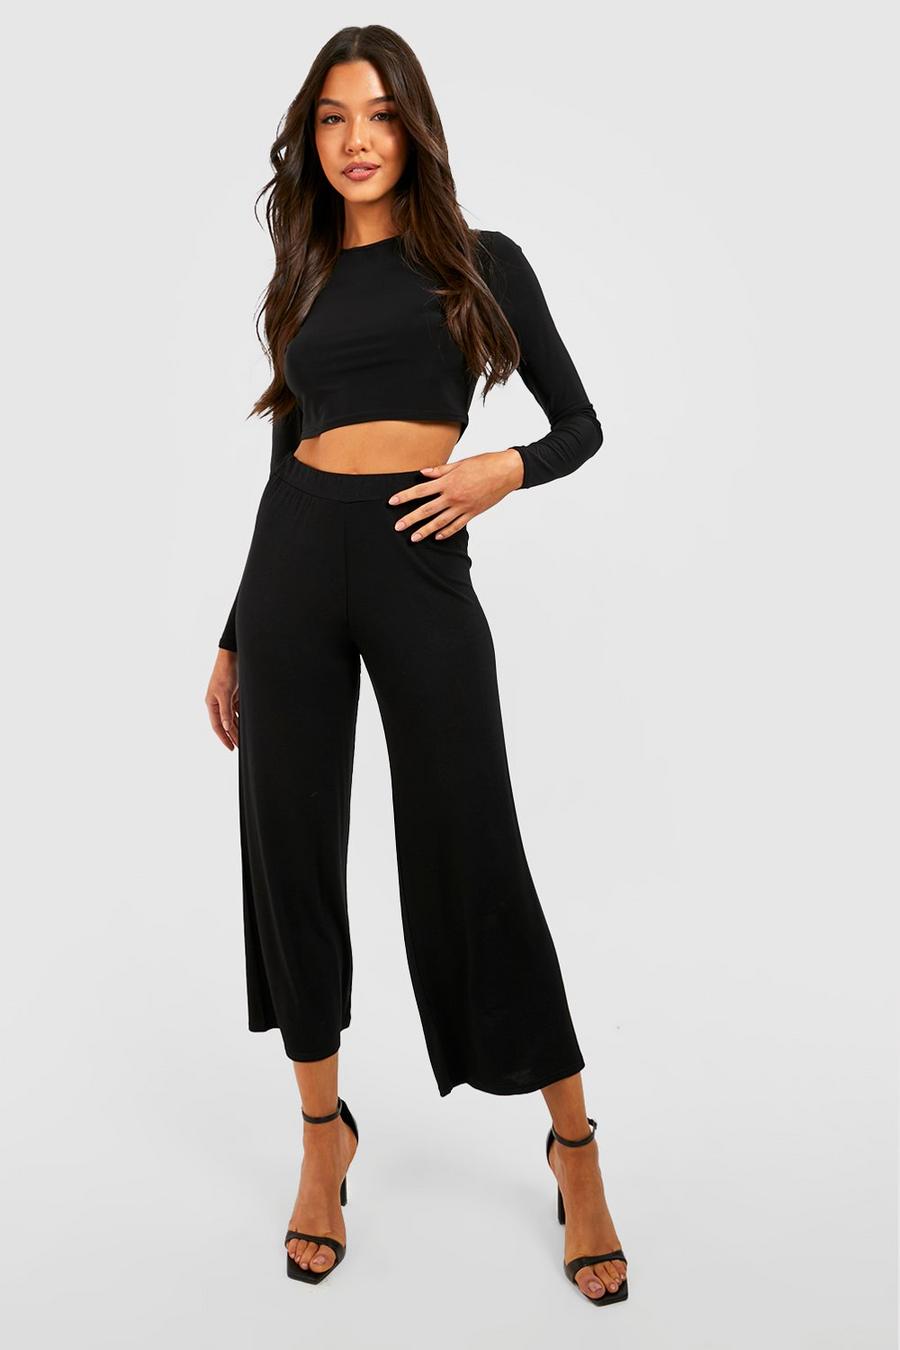 Basic Solid Black High Waisted Jersey Culottes | boohoo